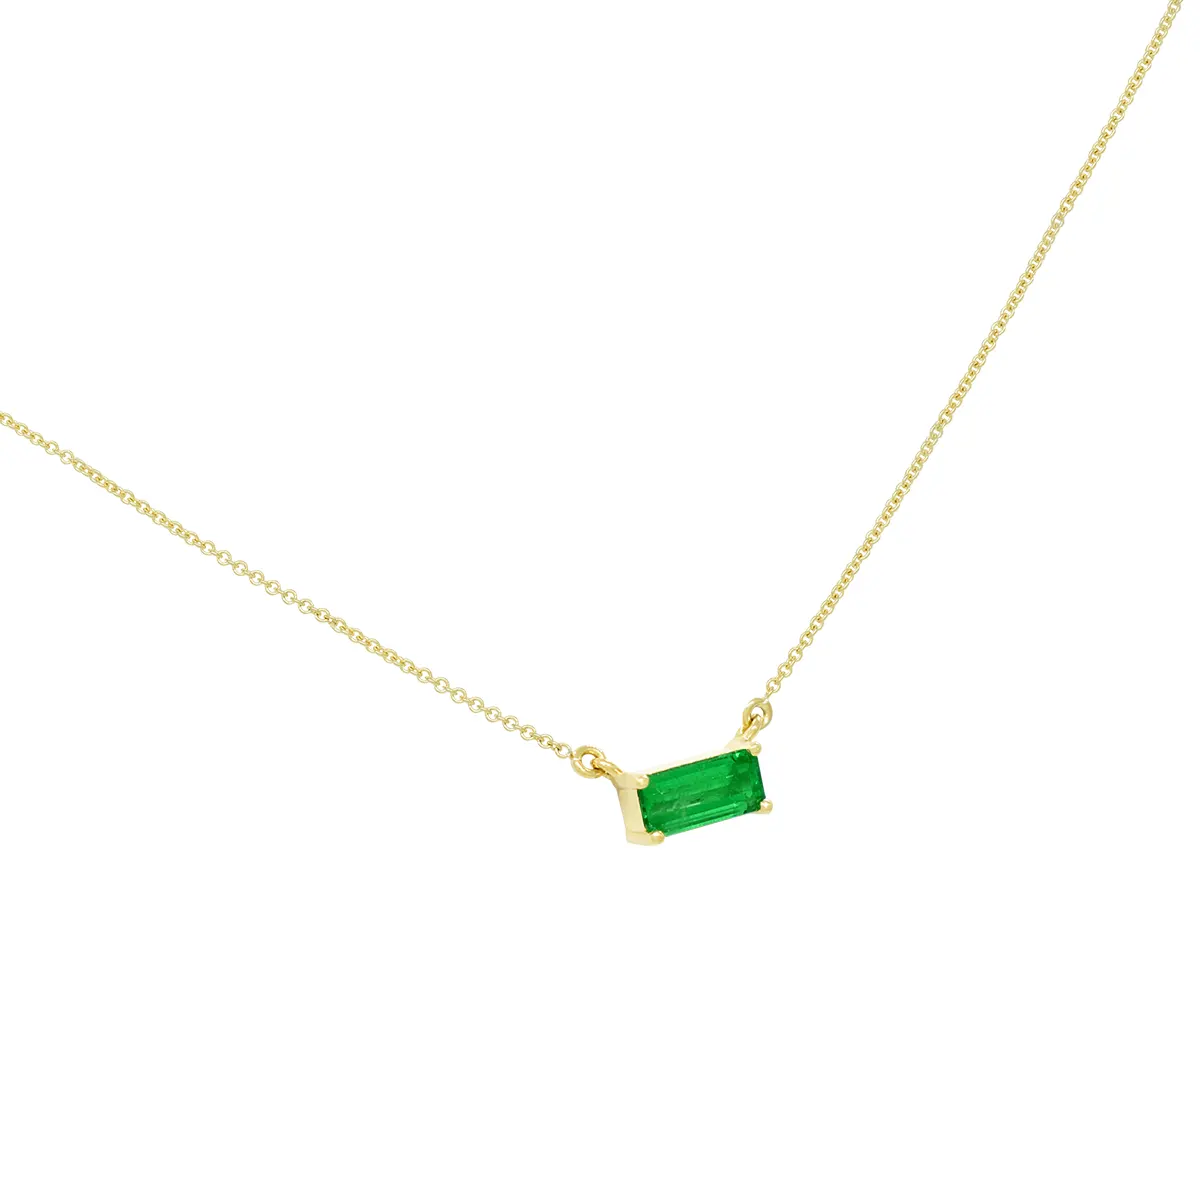 Small Emerald Cut Emerald Necklace in 18K Gold East-West Style